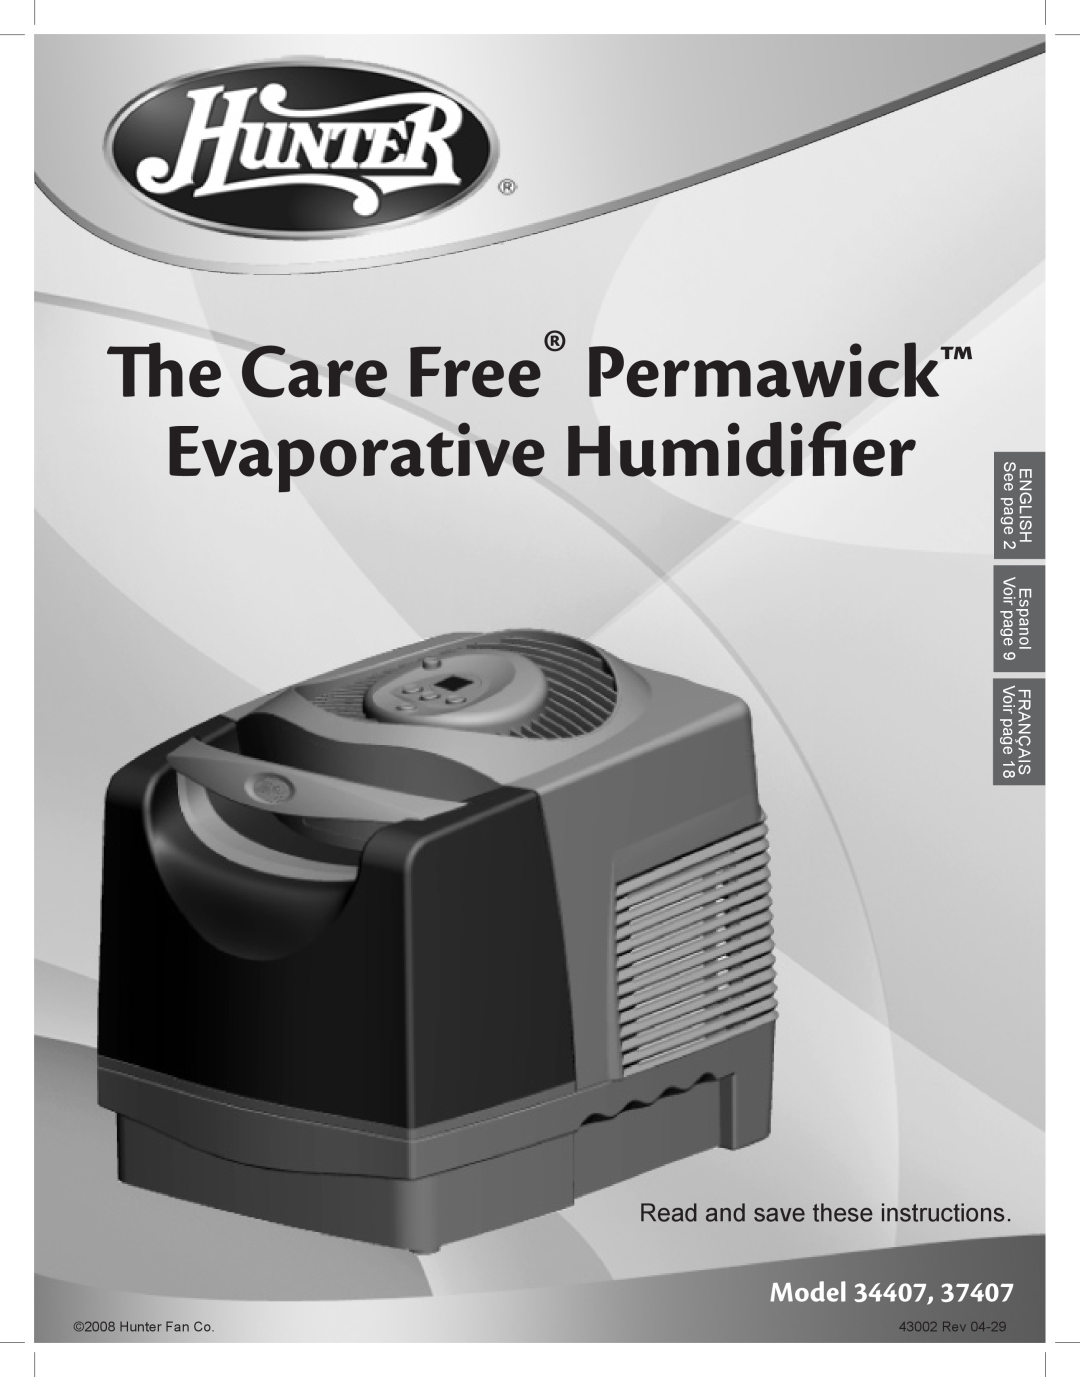 Hunter Fan 37407 manual Evaporative Humidifier, Model, Read and save these instructions, The Care Free Permawick 